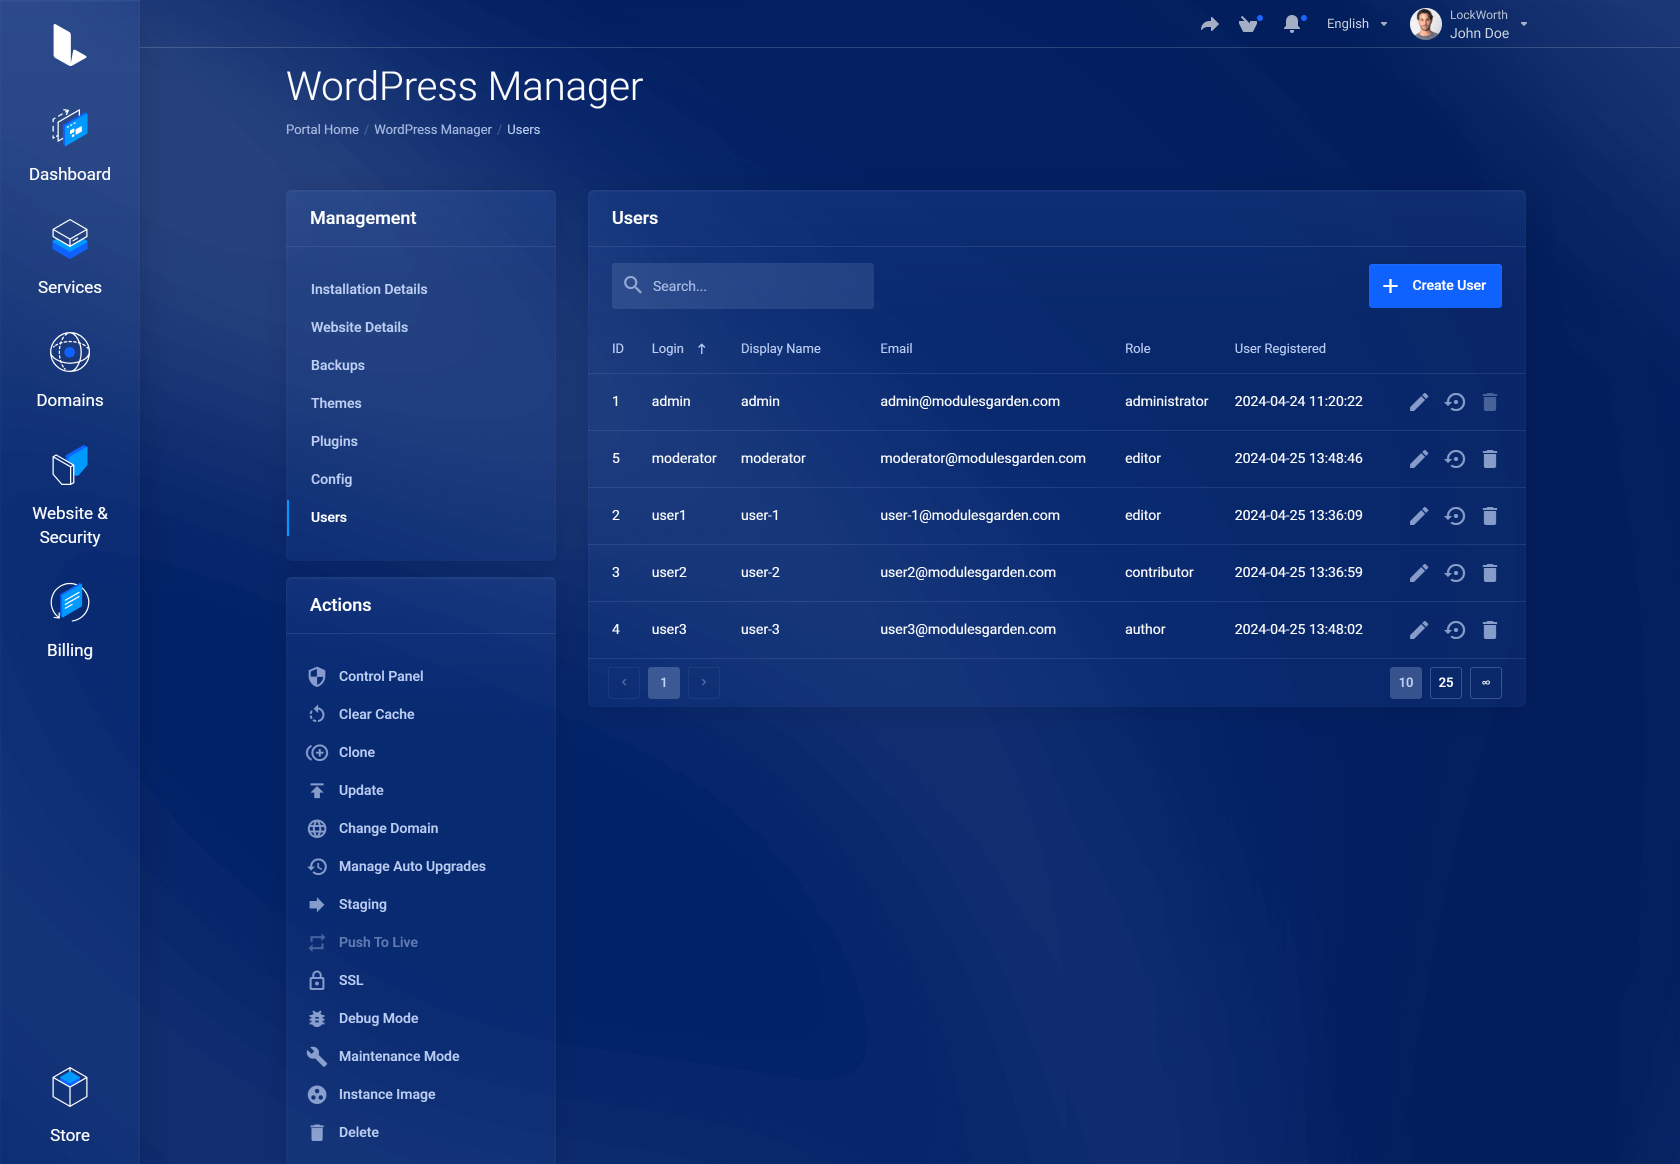 Lagom WHMCS Client Theme - WordPress Manager for WHMCS Module Integration - Futuristic Style